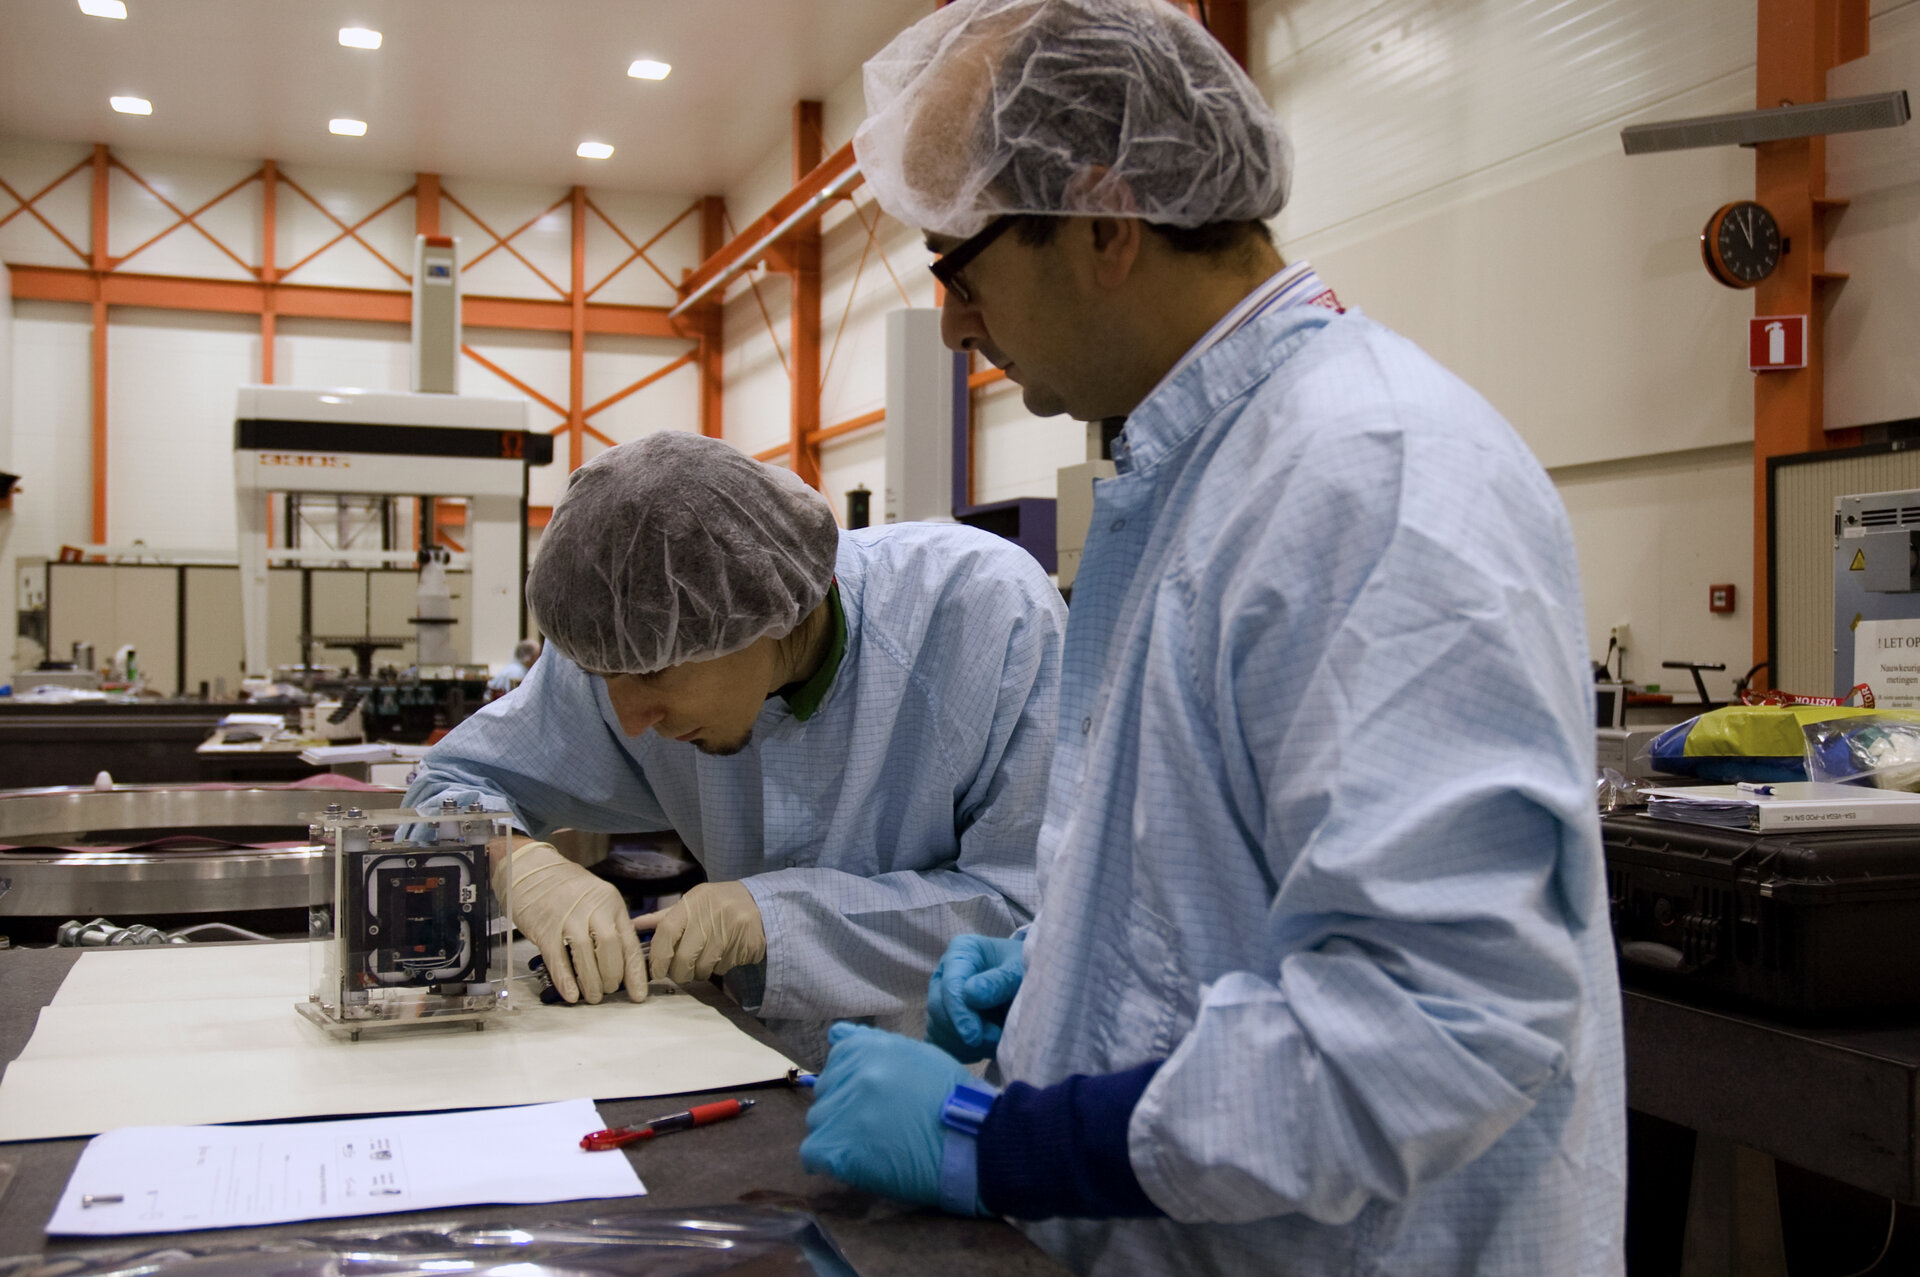 The Xatcobeo team unpack their CubeSat for inspection